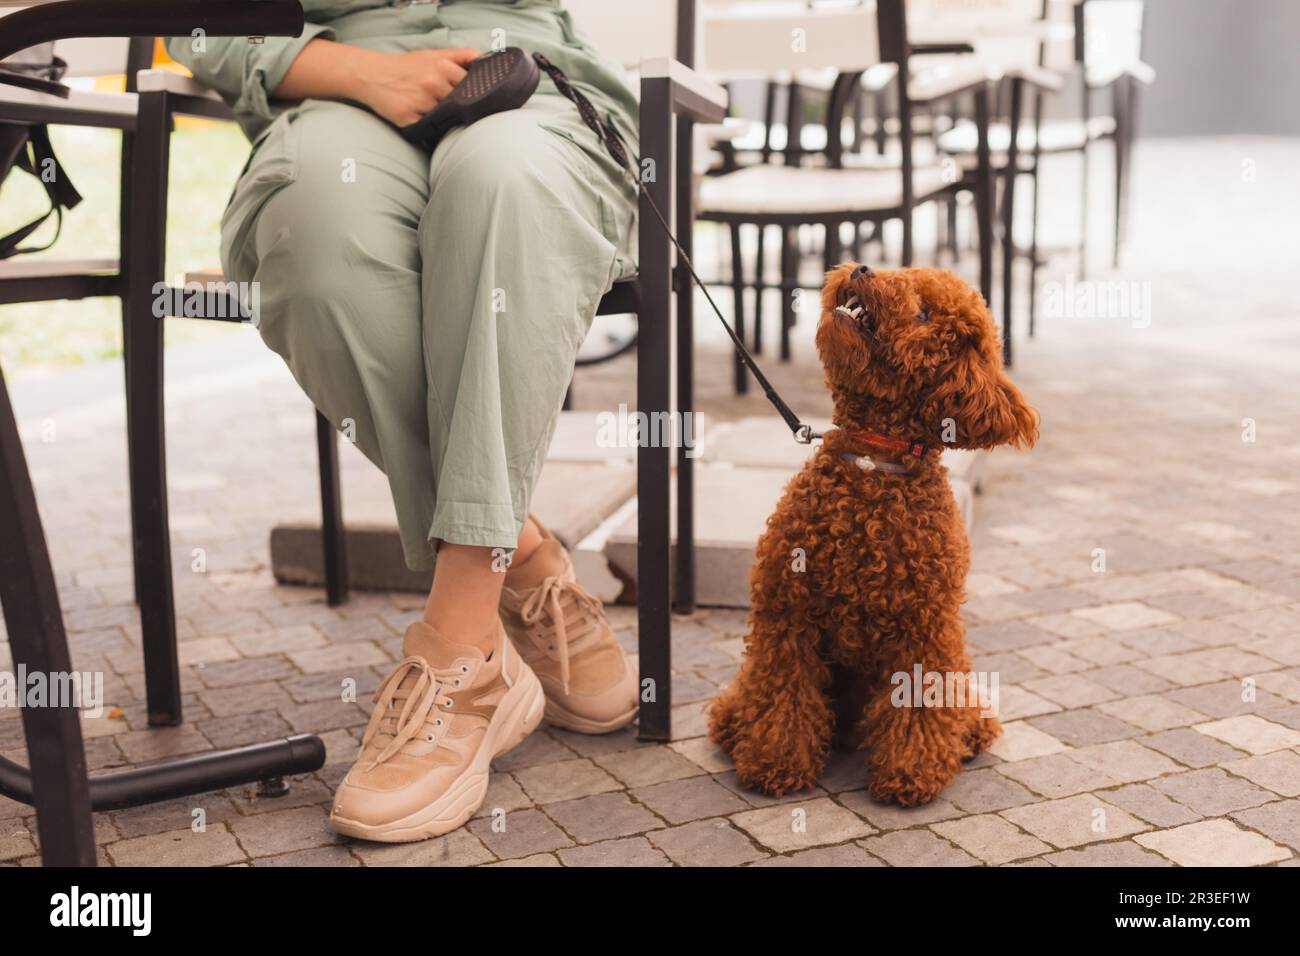 Cute Toy poodle at pet friendly cafe Stock Photo